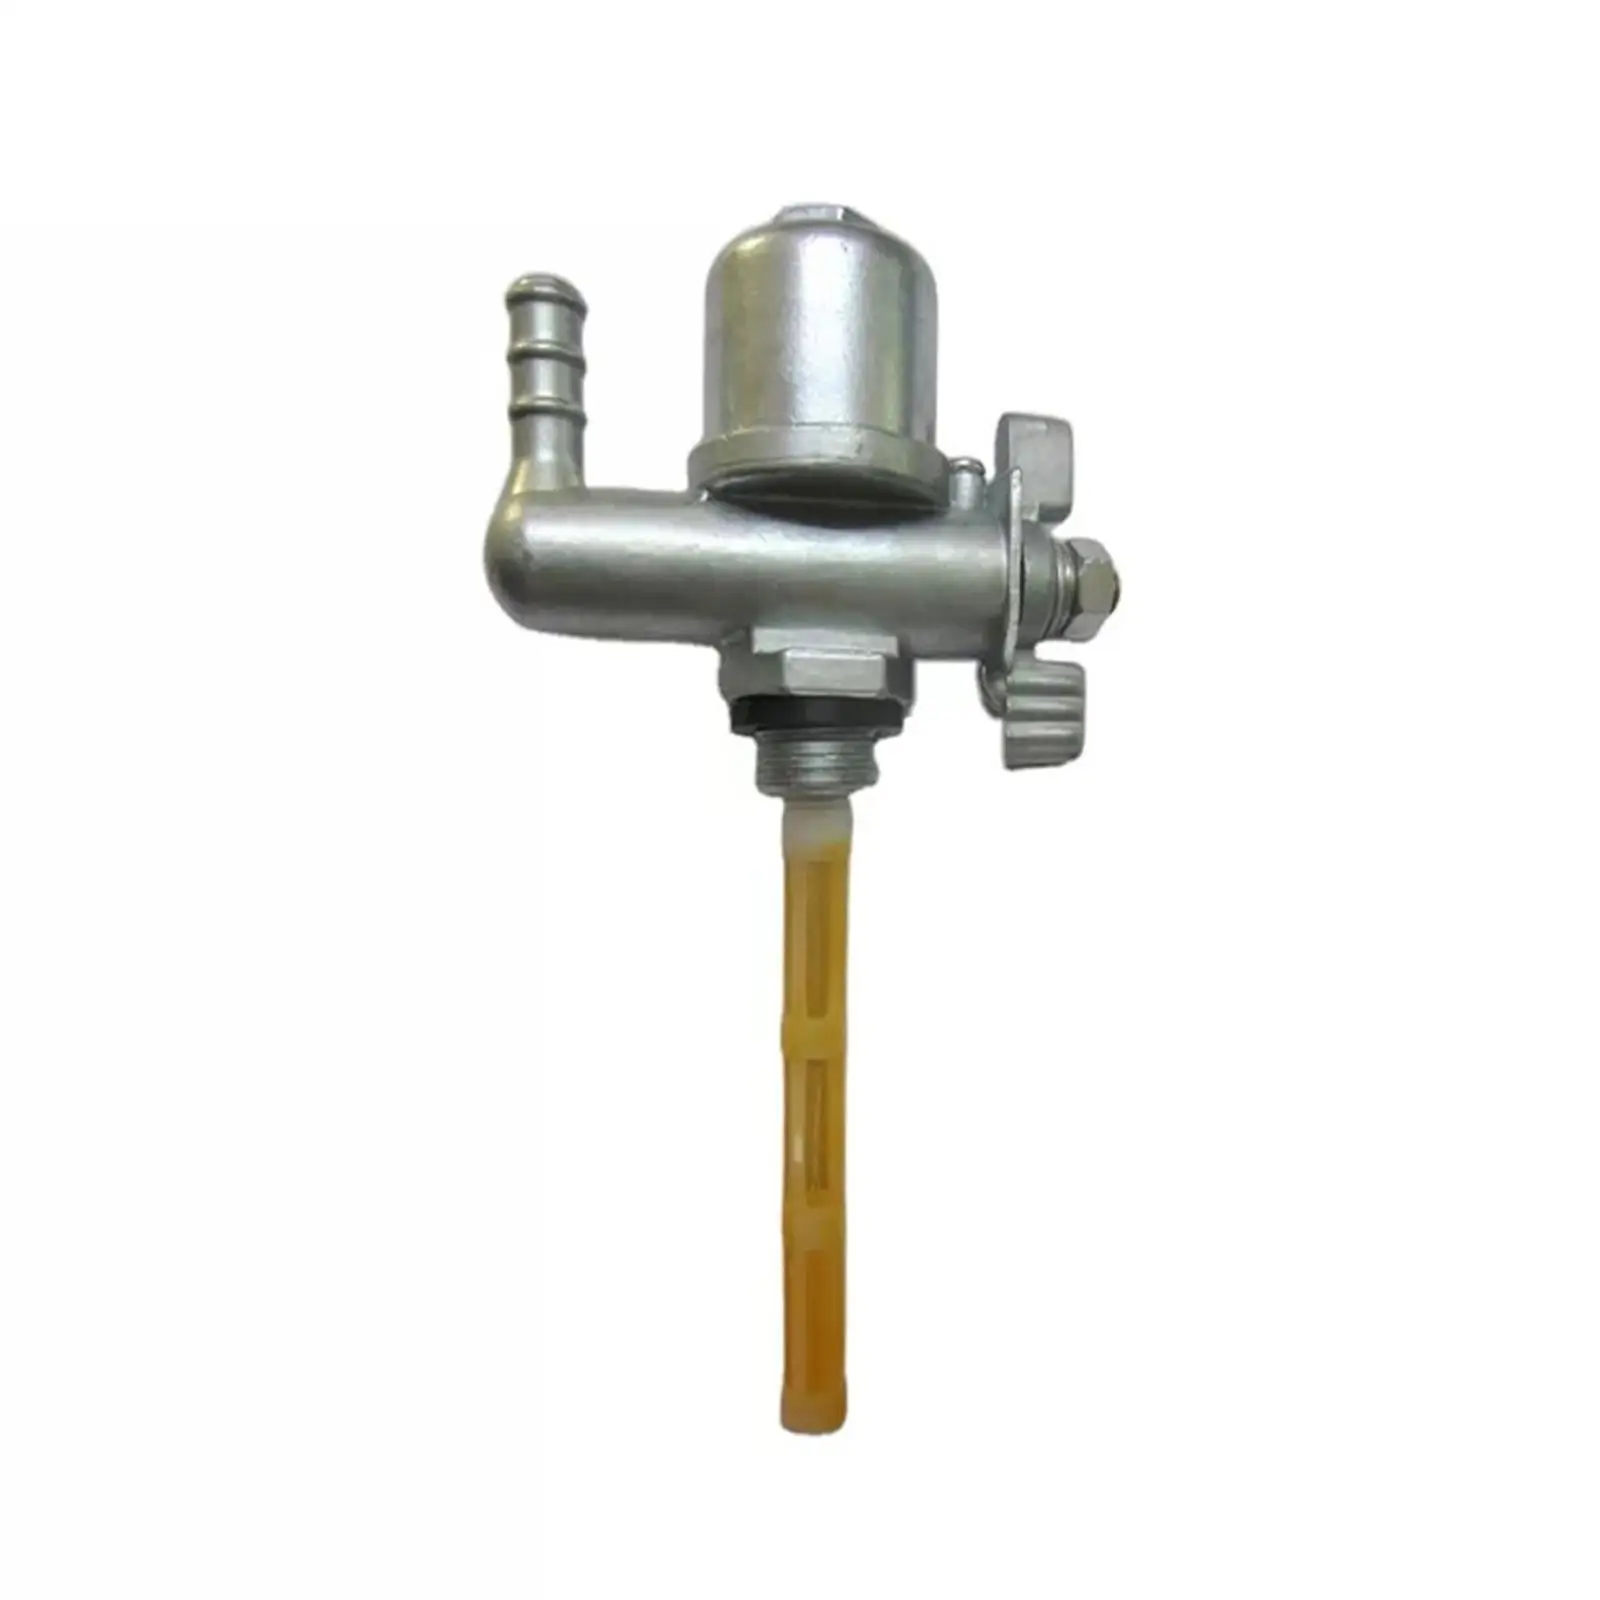 Motorcycle Fuel Gas Petcock Valve switch for Ruassia Msk Motorbike Accessories